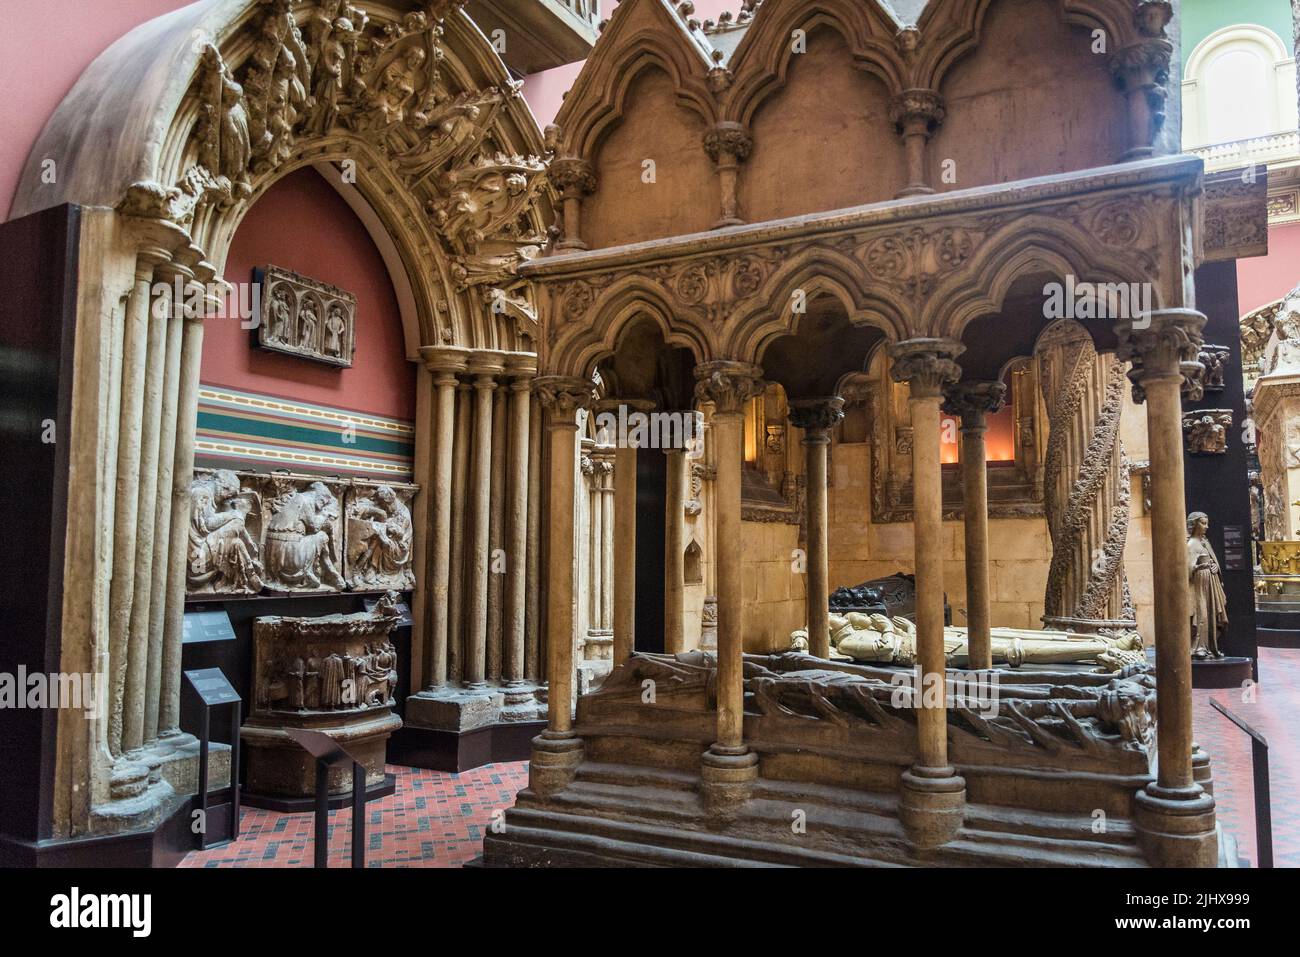 Gothic architecture in the Cast Collection, opened in 1873, the Cast Courts display copies of some of the world's most significant works of art reprod Stock Photo